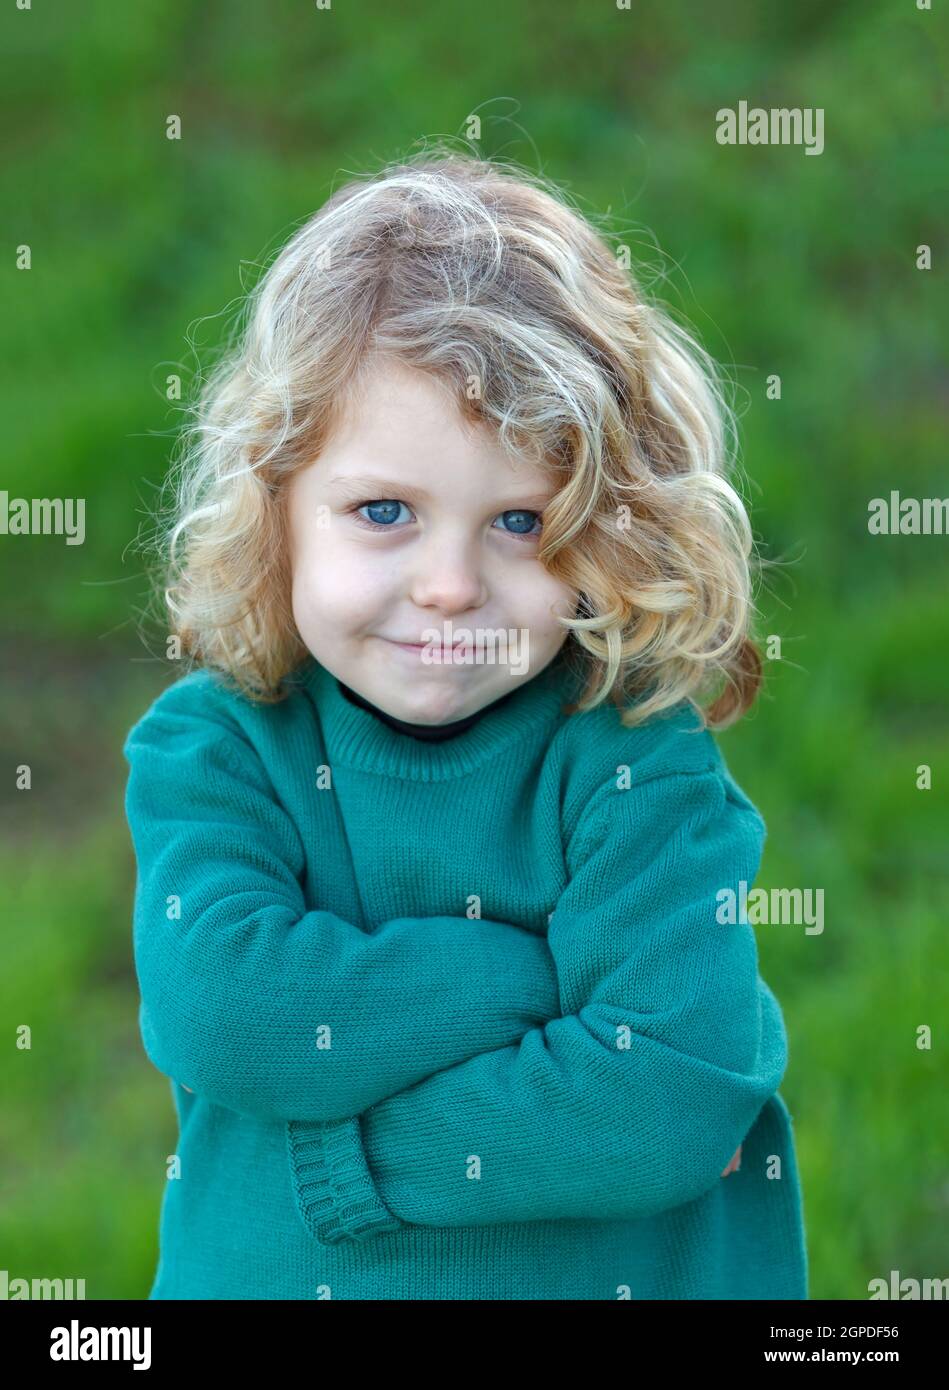 Small angry kid with green jersey in the field Stock Photo